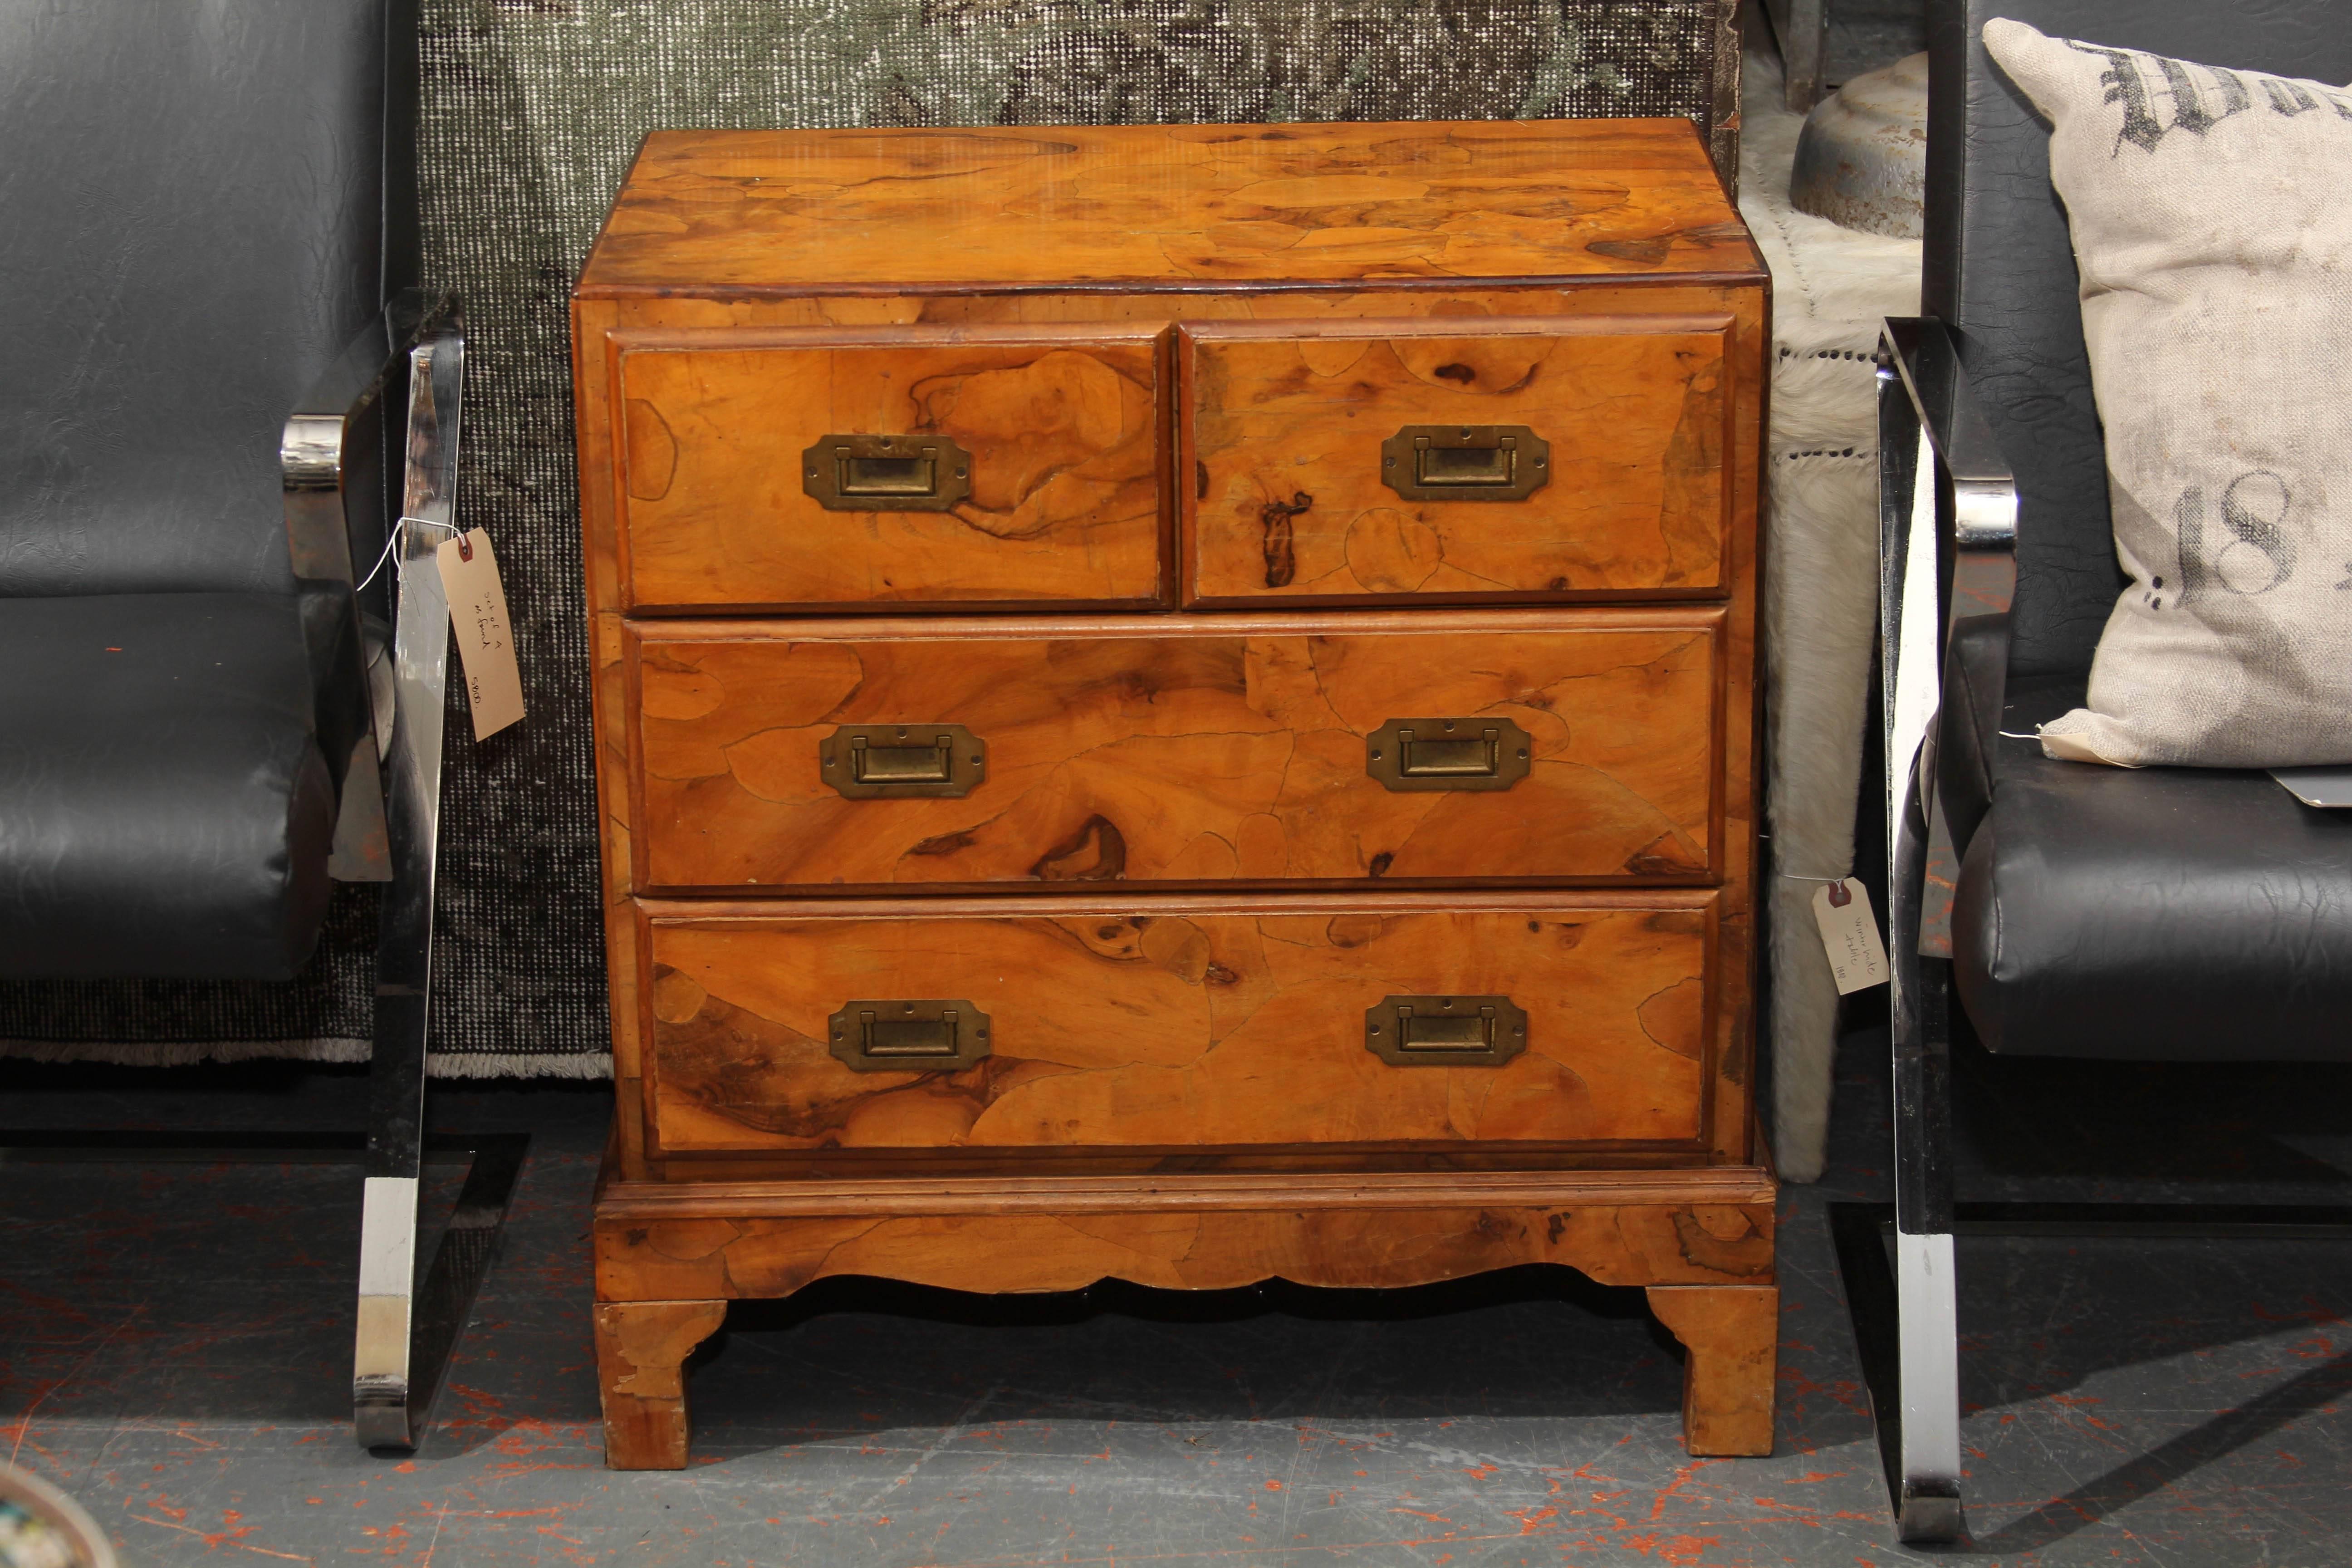 Nice small olivewood chest, made in Italy. Side handles, four drawers.